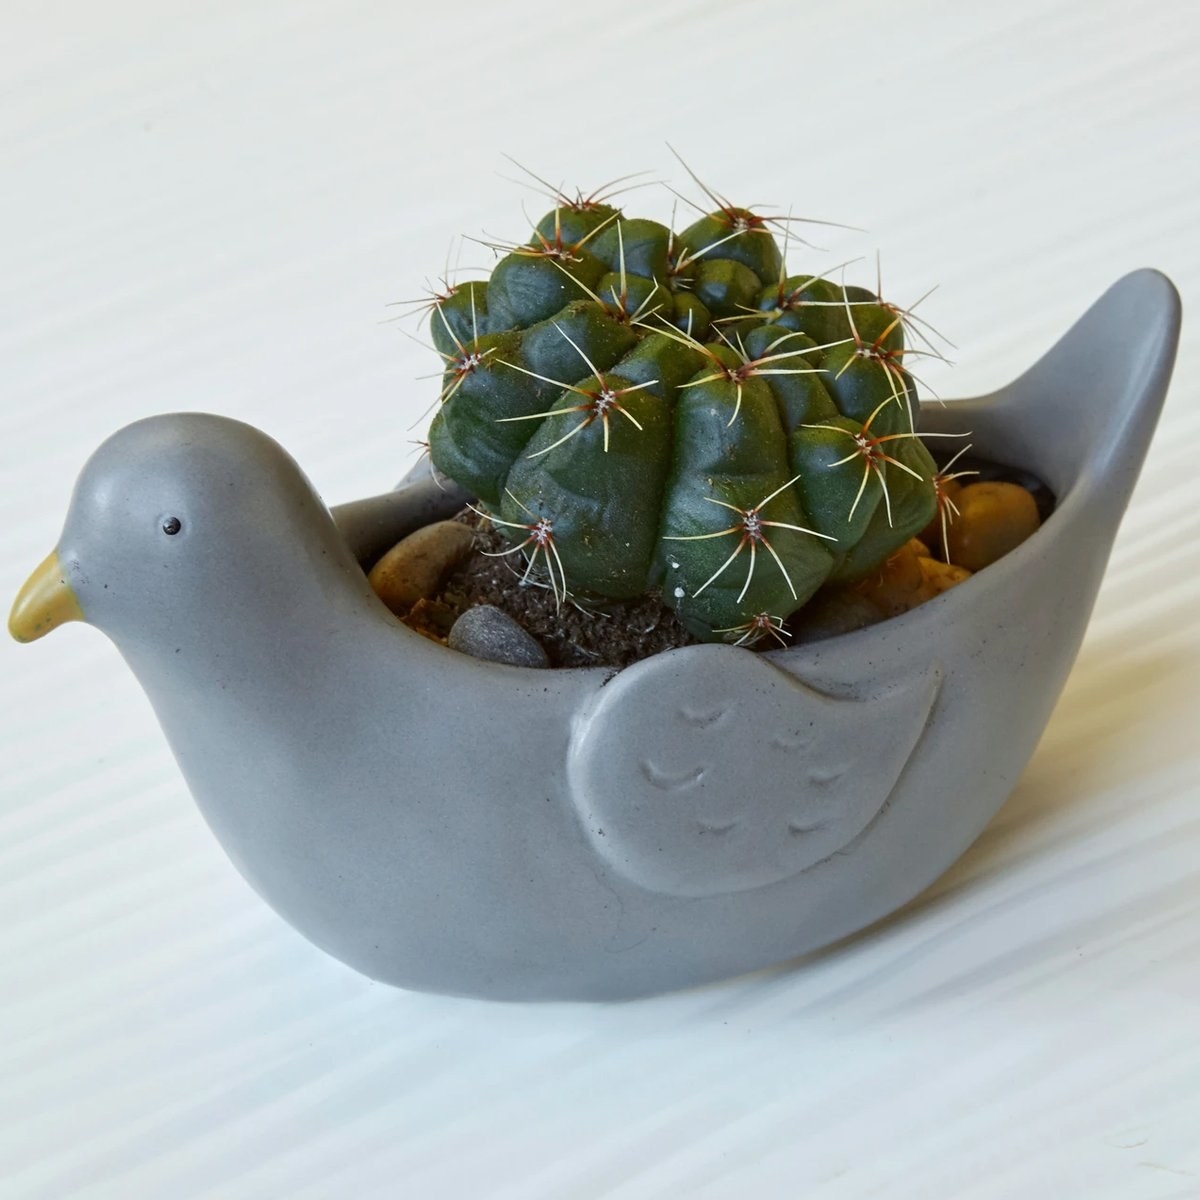 The planter shaped like a sitting pigeon with a mini cactus inside